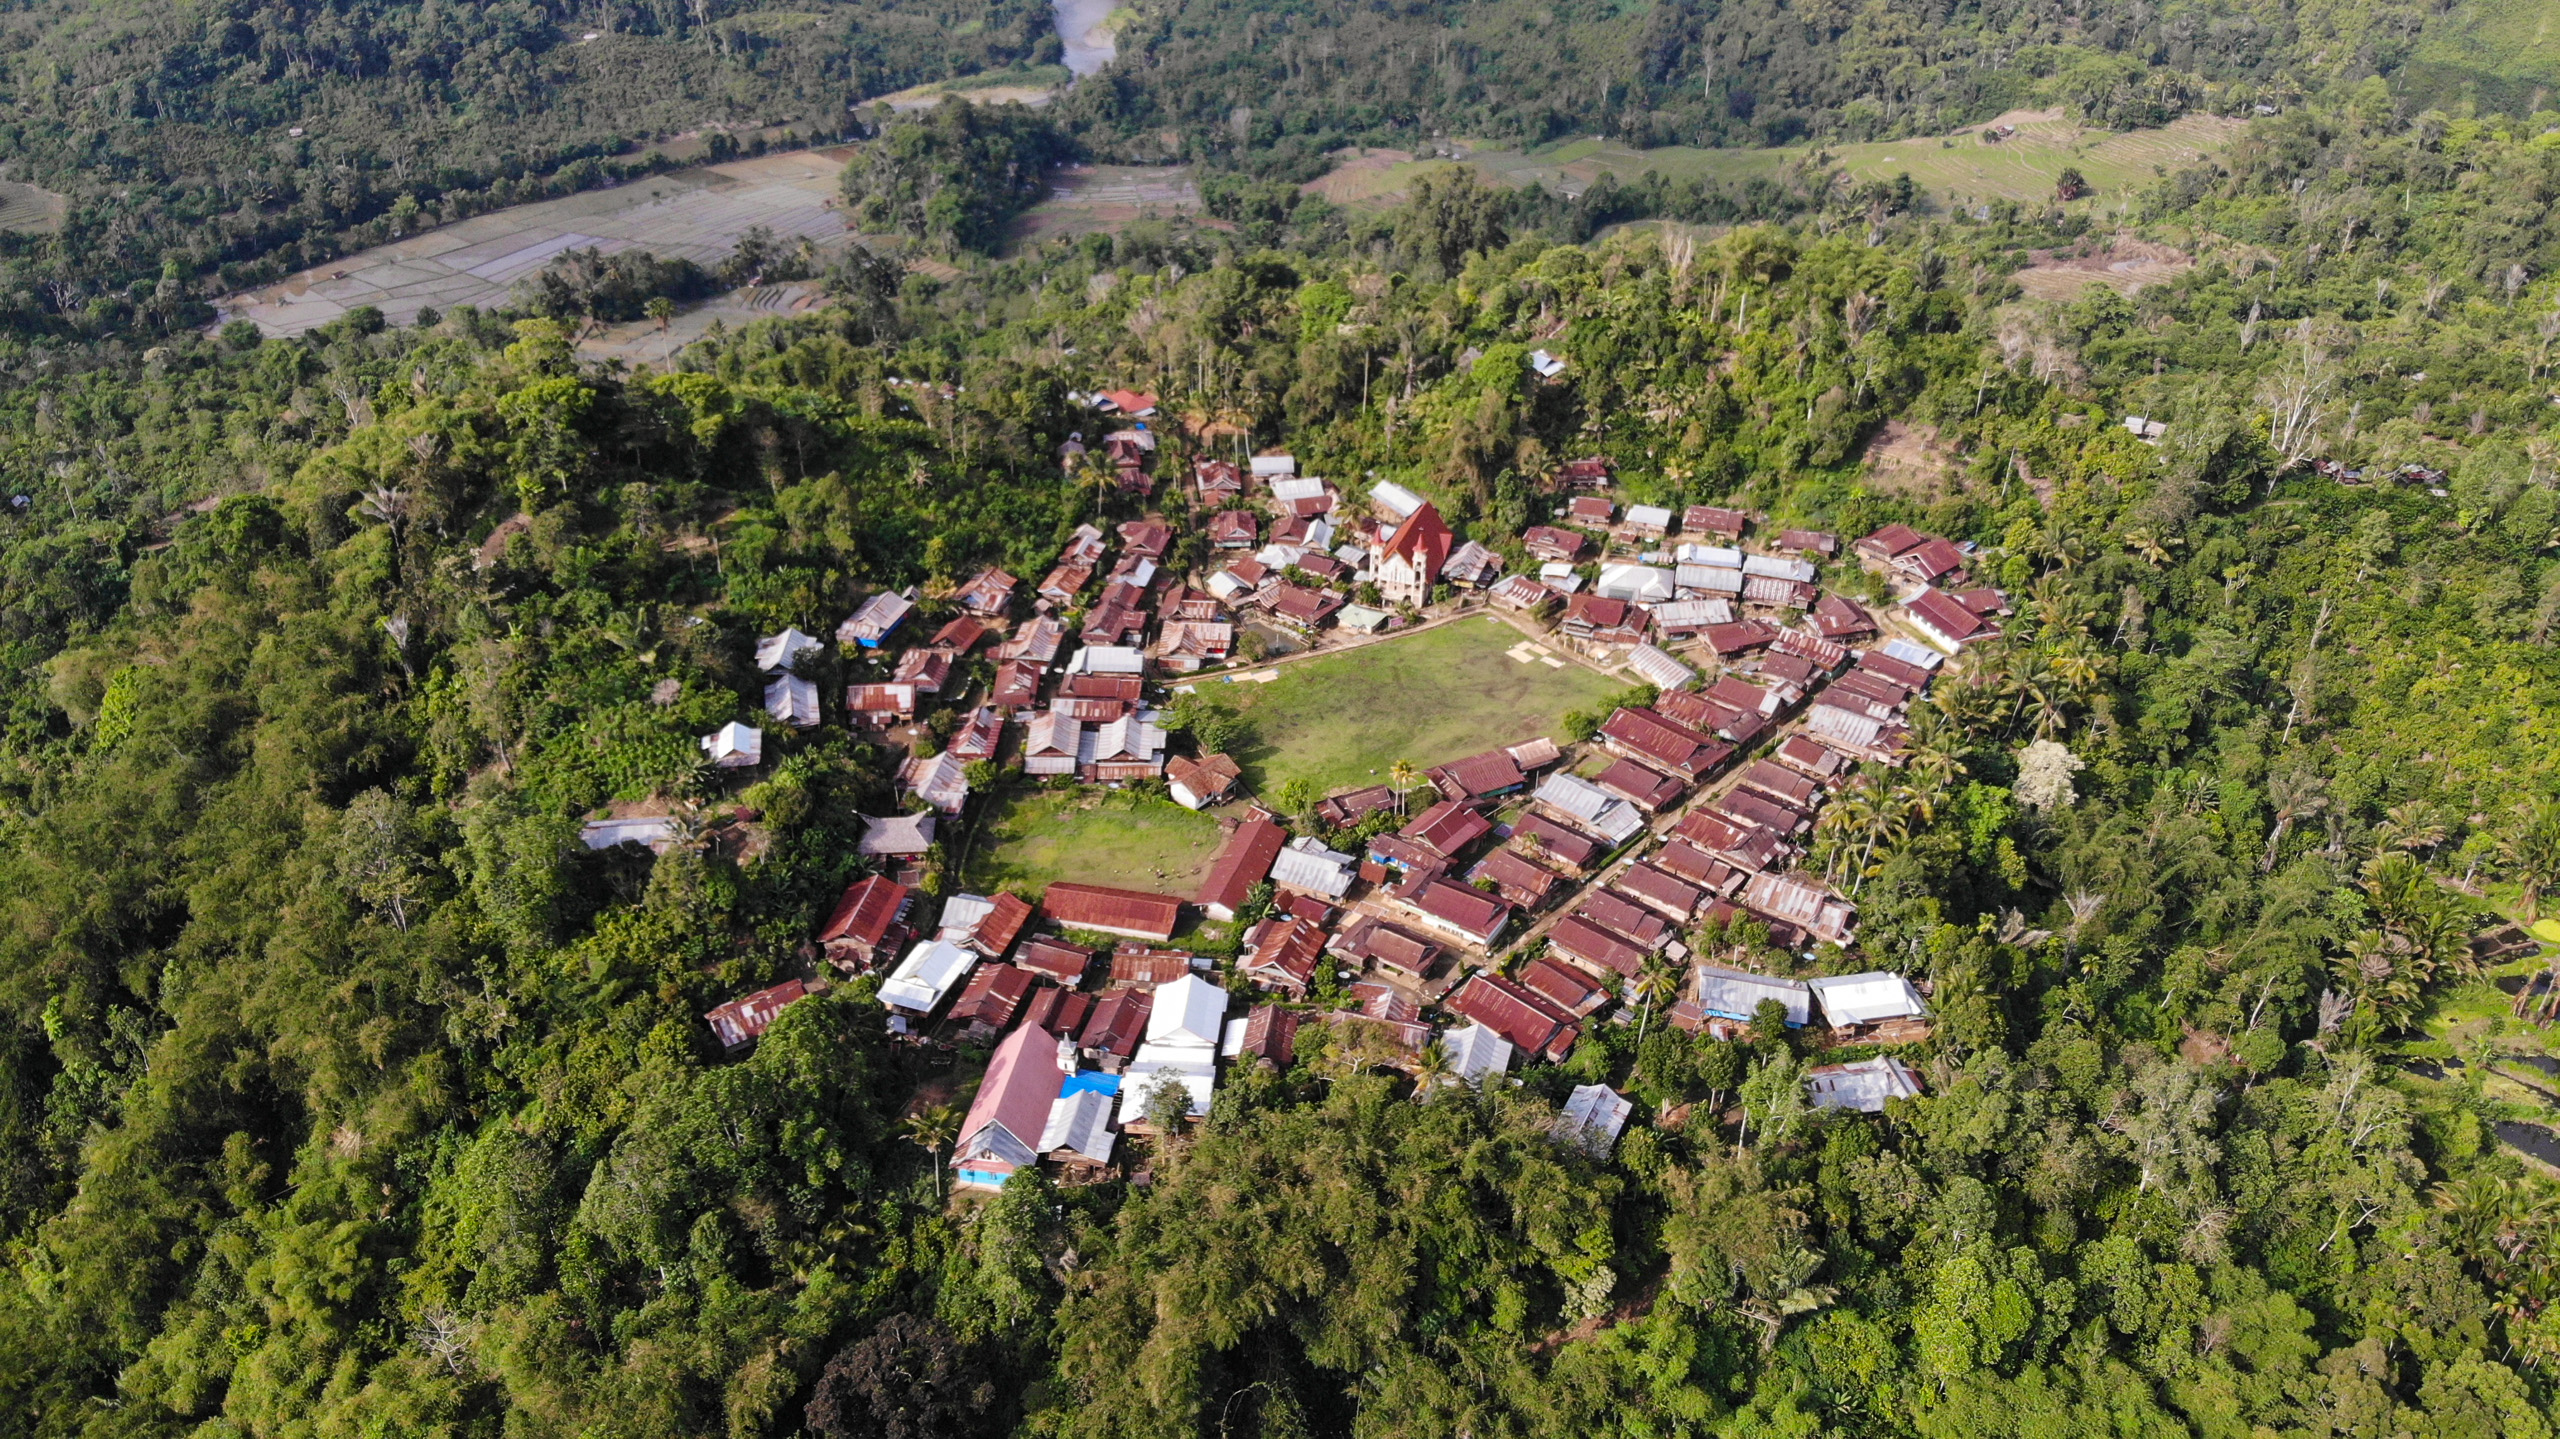 <p>The village of Hoyane, nestled in the still-forested highlands of the Indonesian island of Sulawesi. The Hoyane Indigenous community have been pushing for legal recognition of their customary territory for 20 years. (Image: <a href="https://www.instagram.com/junaidi_hanafiah/">Junaidi Hanafiah</a> / Dialogue Earth)</p>